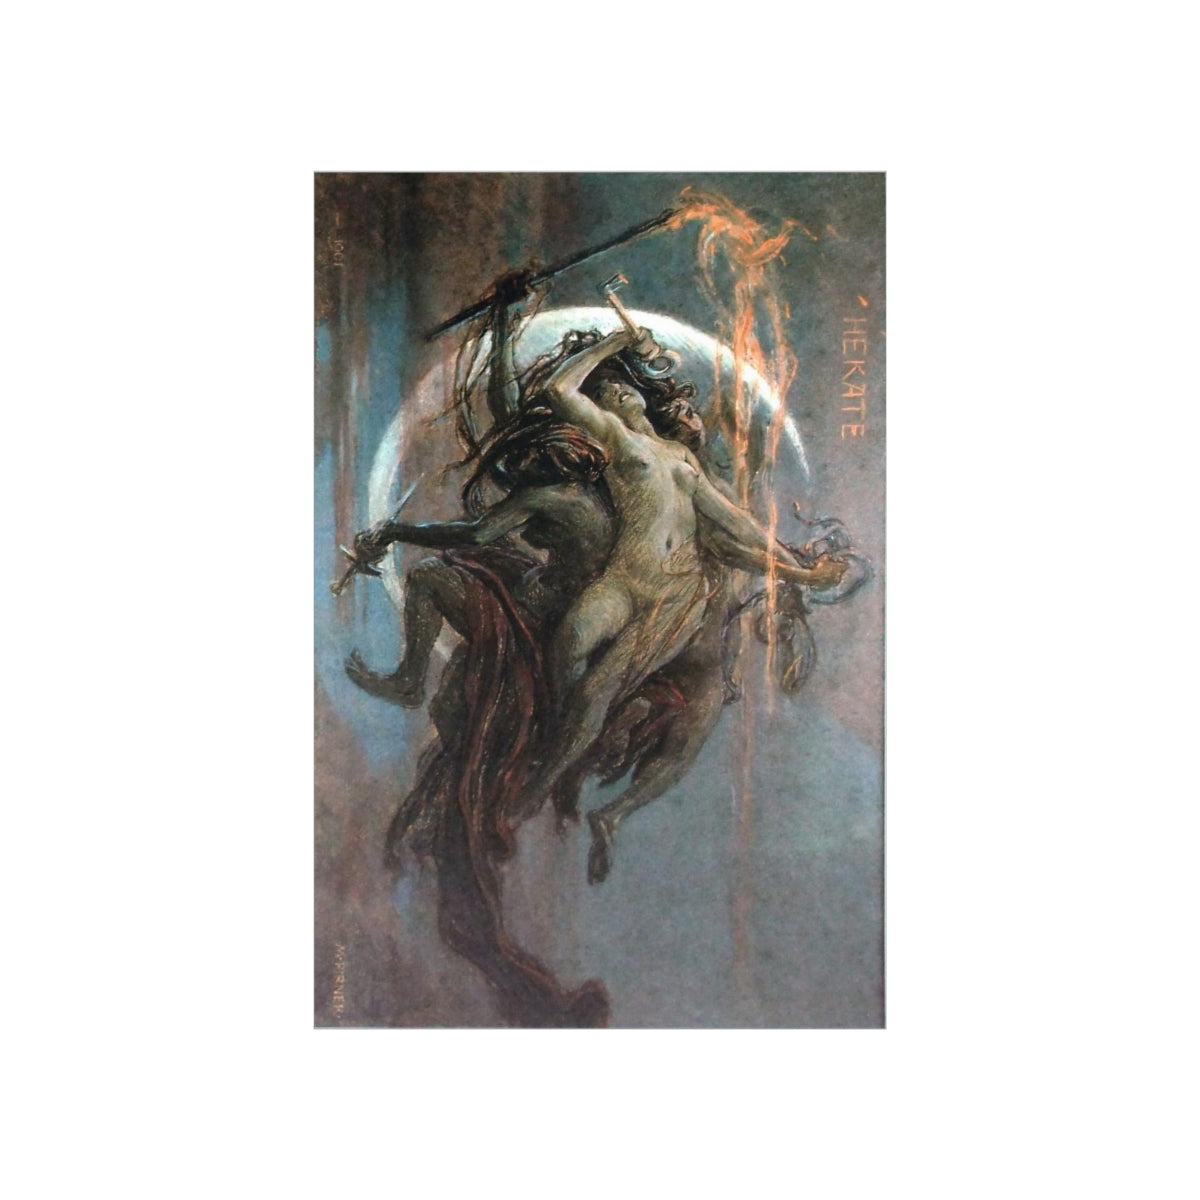 Hekate By Maximilian Pirner 1901 Print Poster